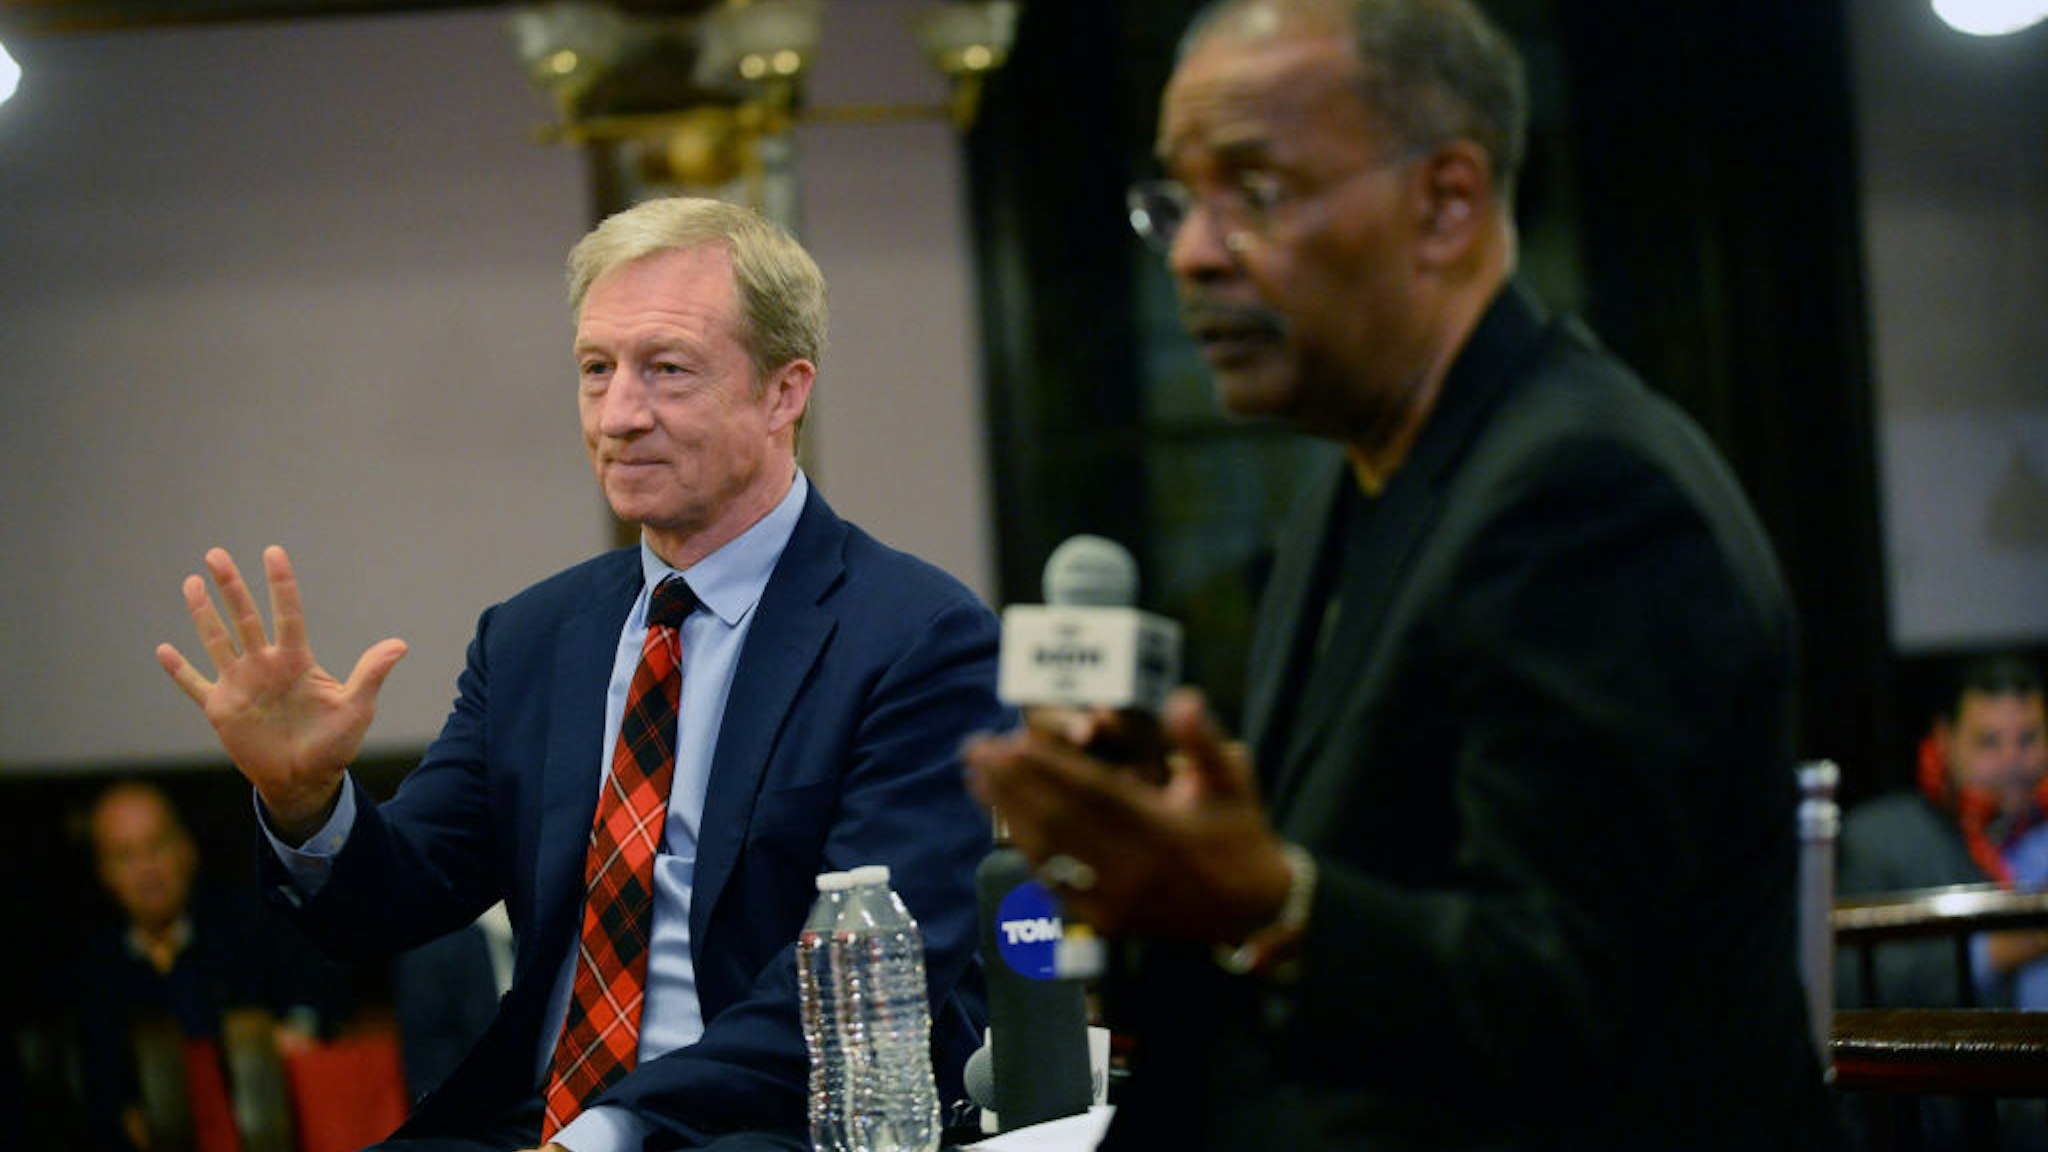 Democratic presidential candidate Tom Steyer attends A People's Town Hall hosted by SiriusXM Urban View's Joe Madison at Mother Emanuel Church on February 27, 2020 in Charleston, South Carolina.